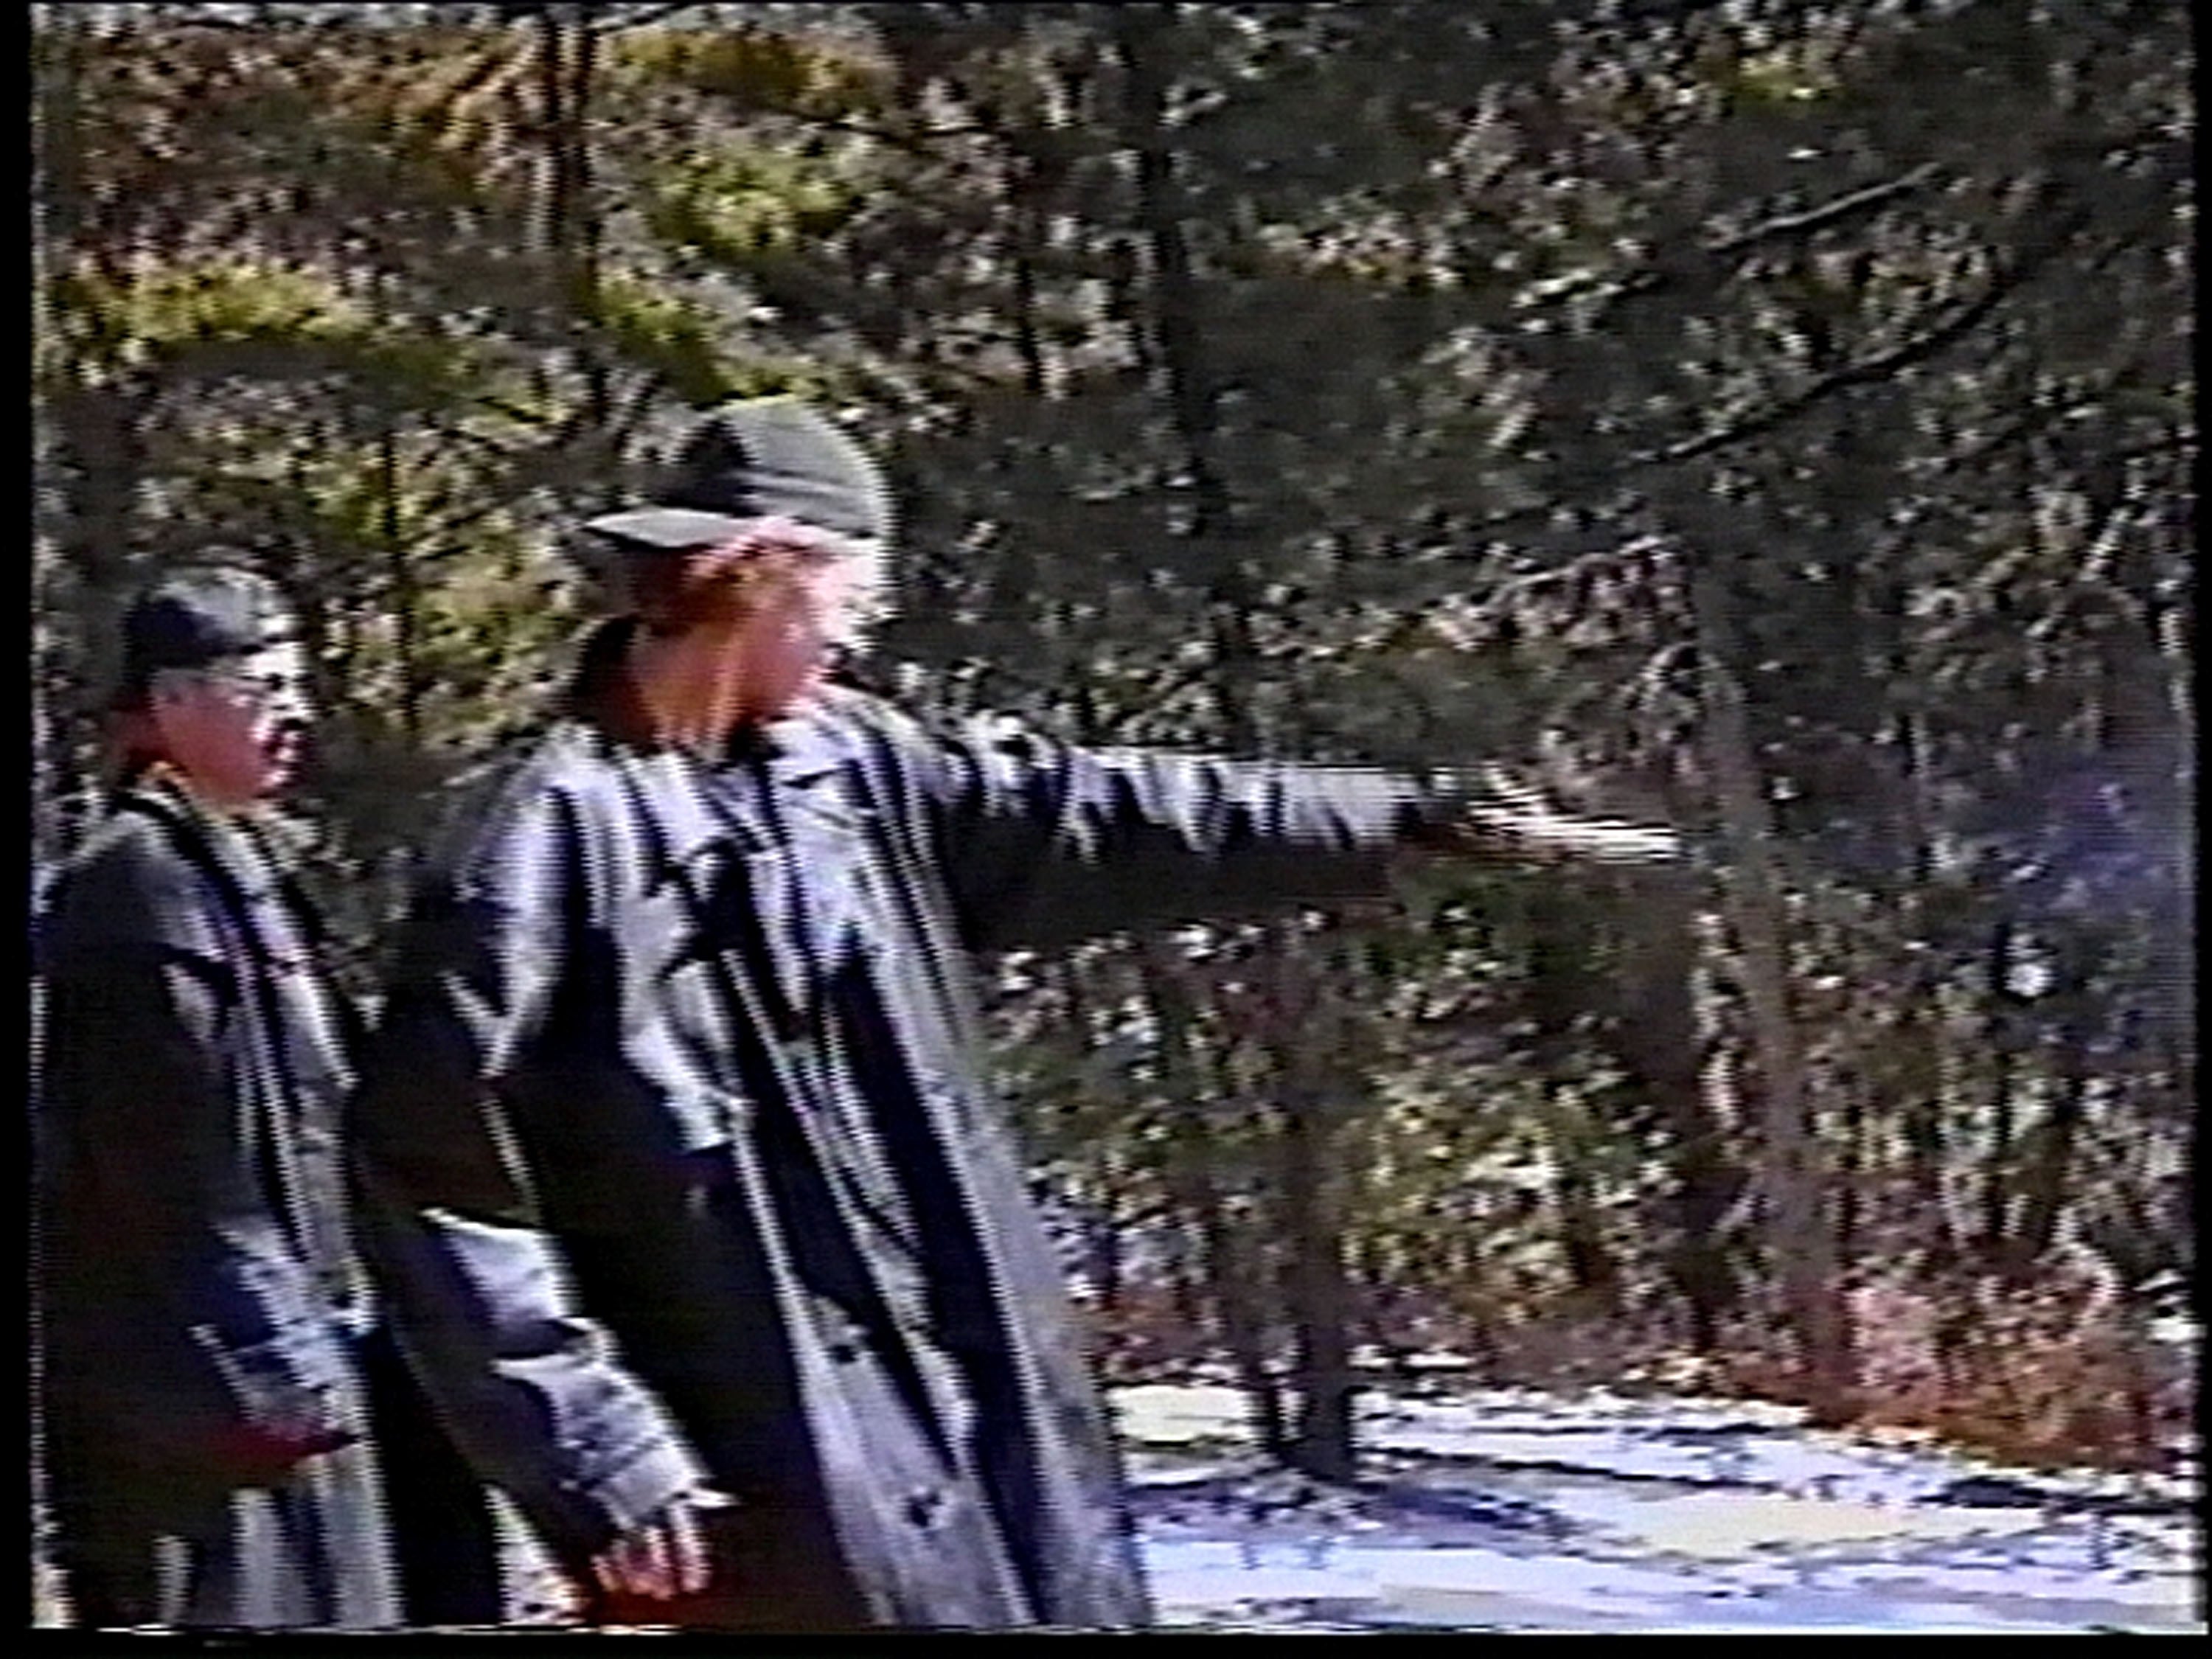 Eric Harris (L) watches as Dylan Klebold practices shooting a gun at a makeshift shooting range March 6, 1999 in Douglas County